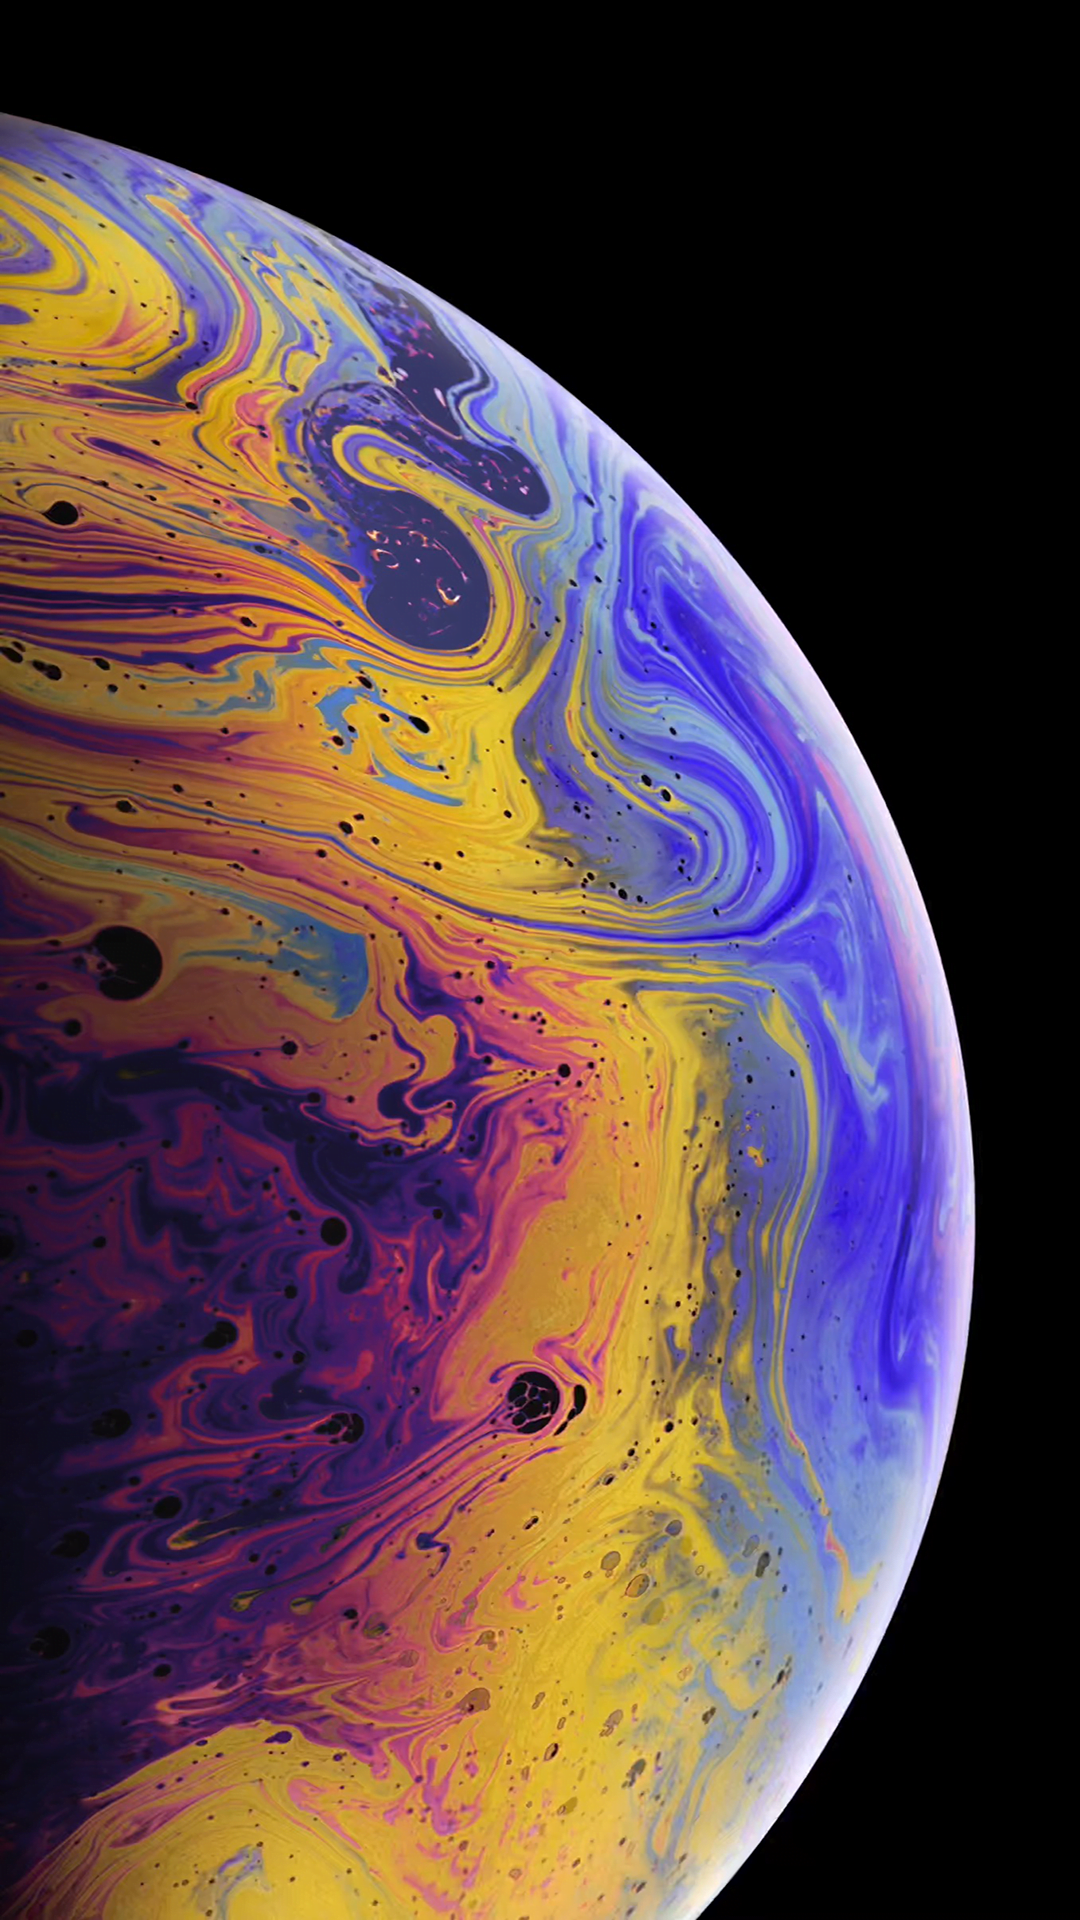 Download iPhone XS Wallpapers Right Now From Here